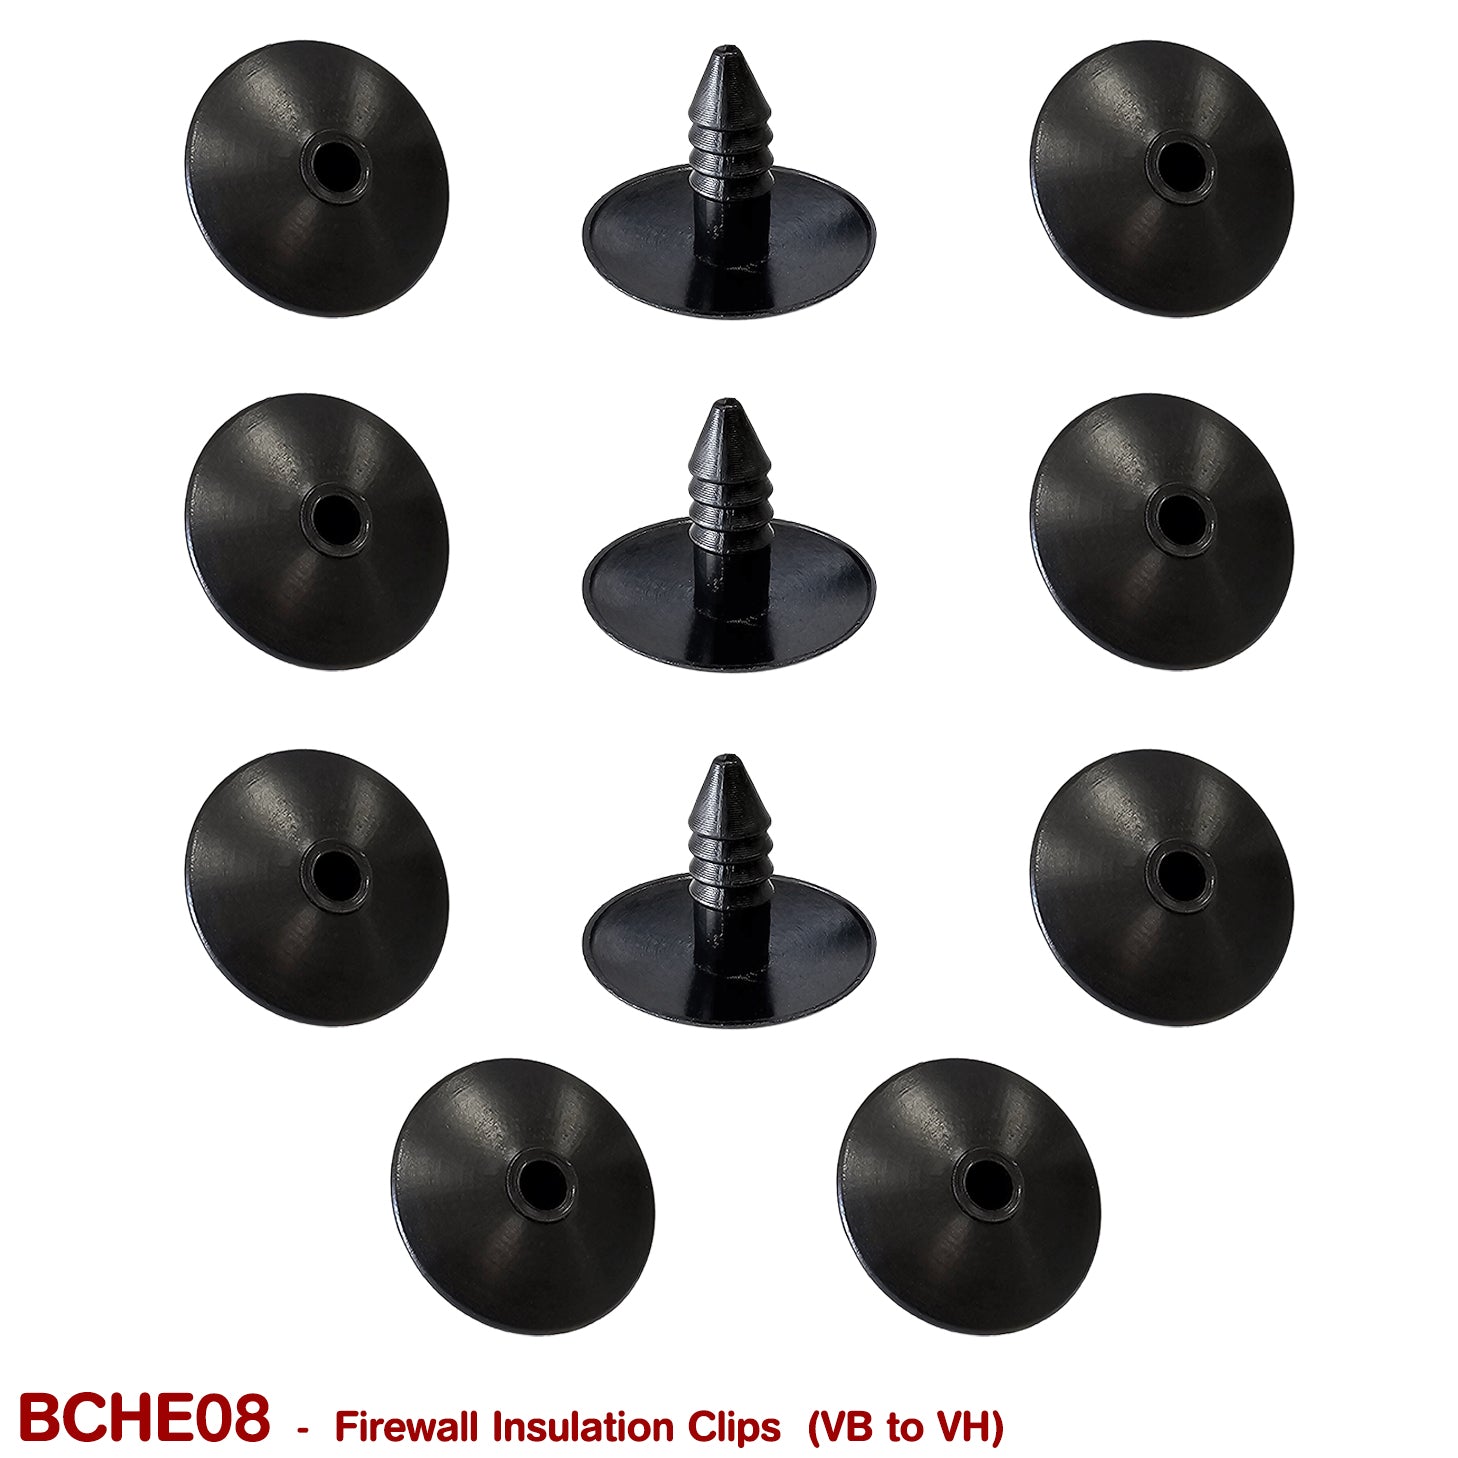 ENGINE BAY FIREWALL INSULATION CLIPS for VB VC VH